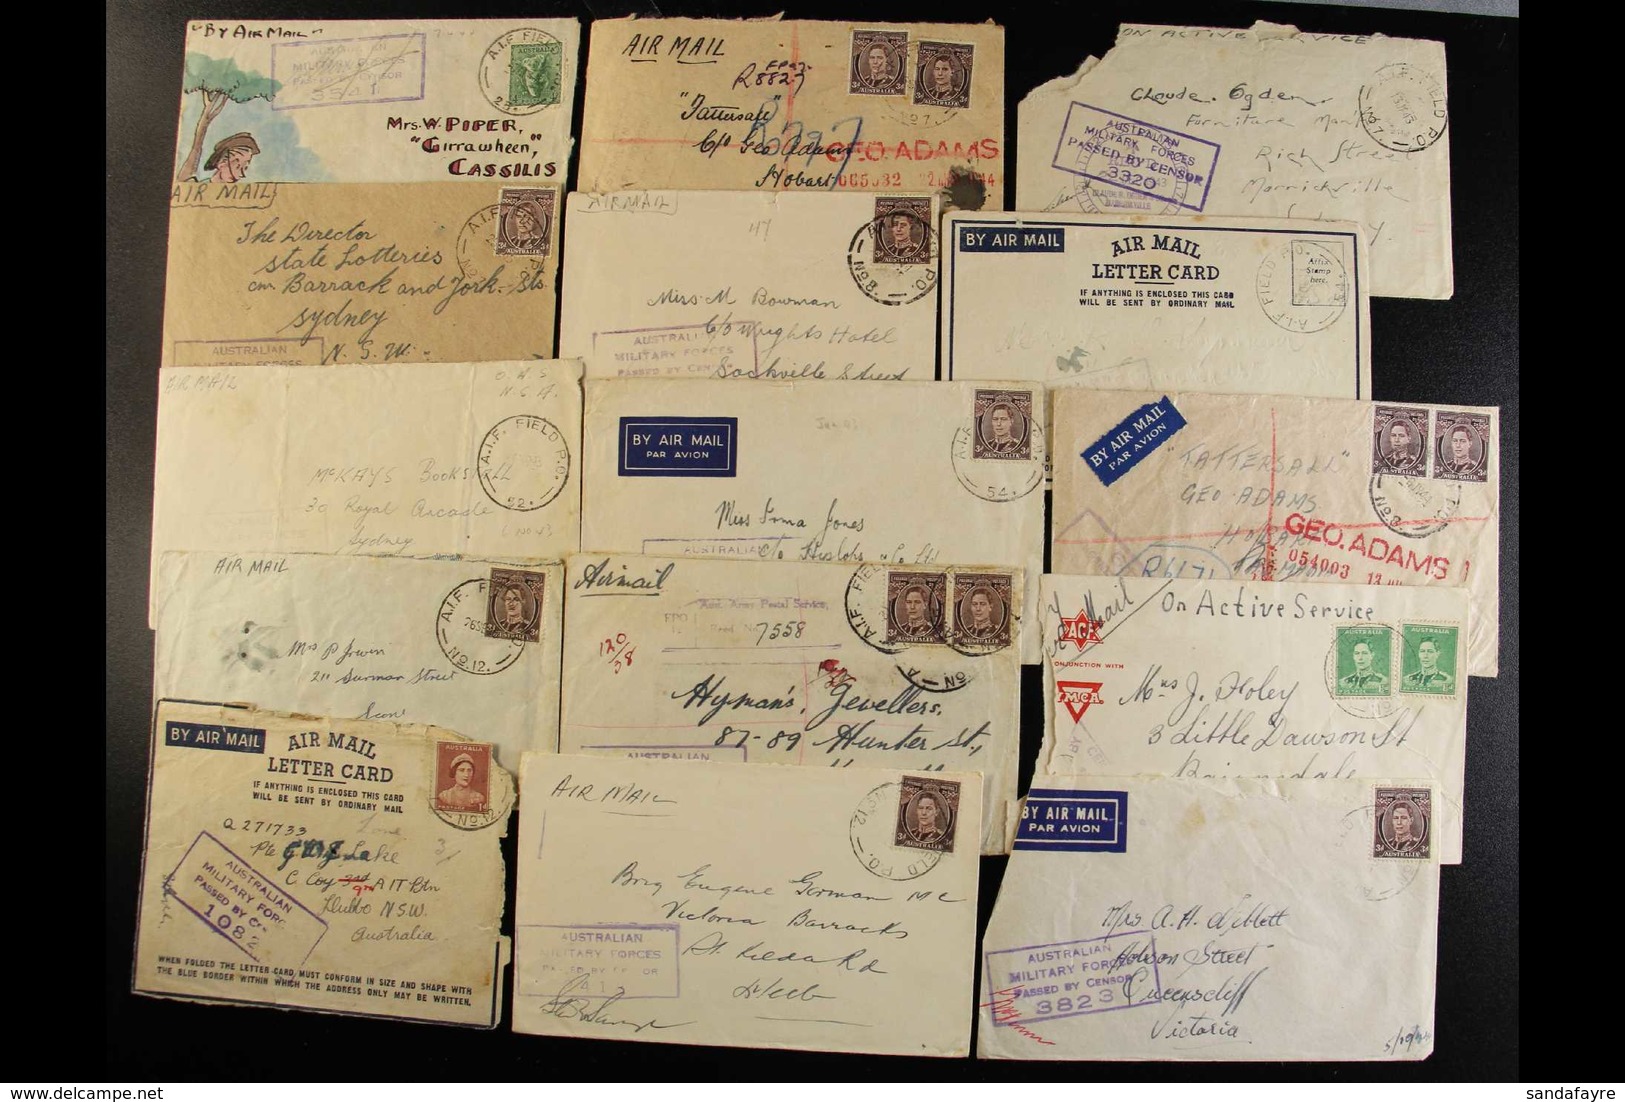 WW2 AUSTRALIAN FORCES - A.I.F. FIELD P.O. DATESTAMPS A Fine Collection Of Covers (couple Of Fronts) Back To Australia, B - Papoea-Nieuw-Guinea